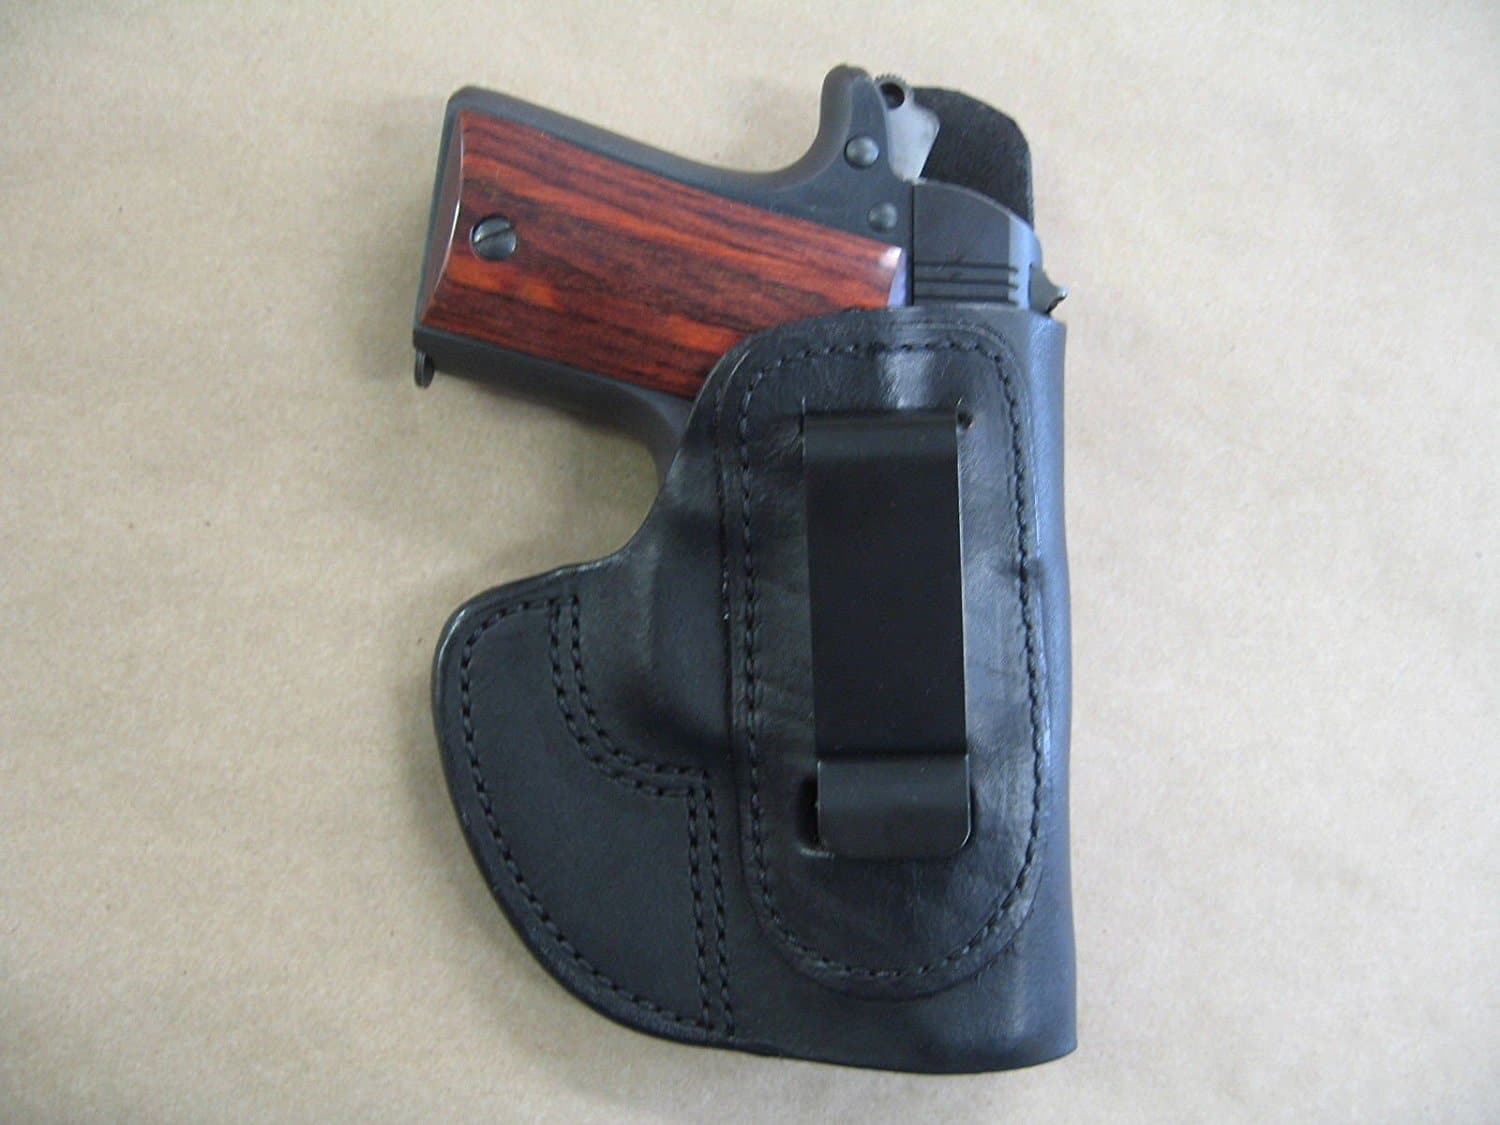  IWB Molded Leather Concealed Carry Holster by Azula Gun Holsters